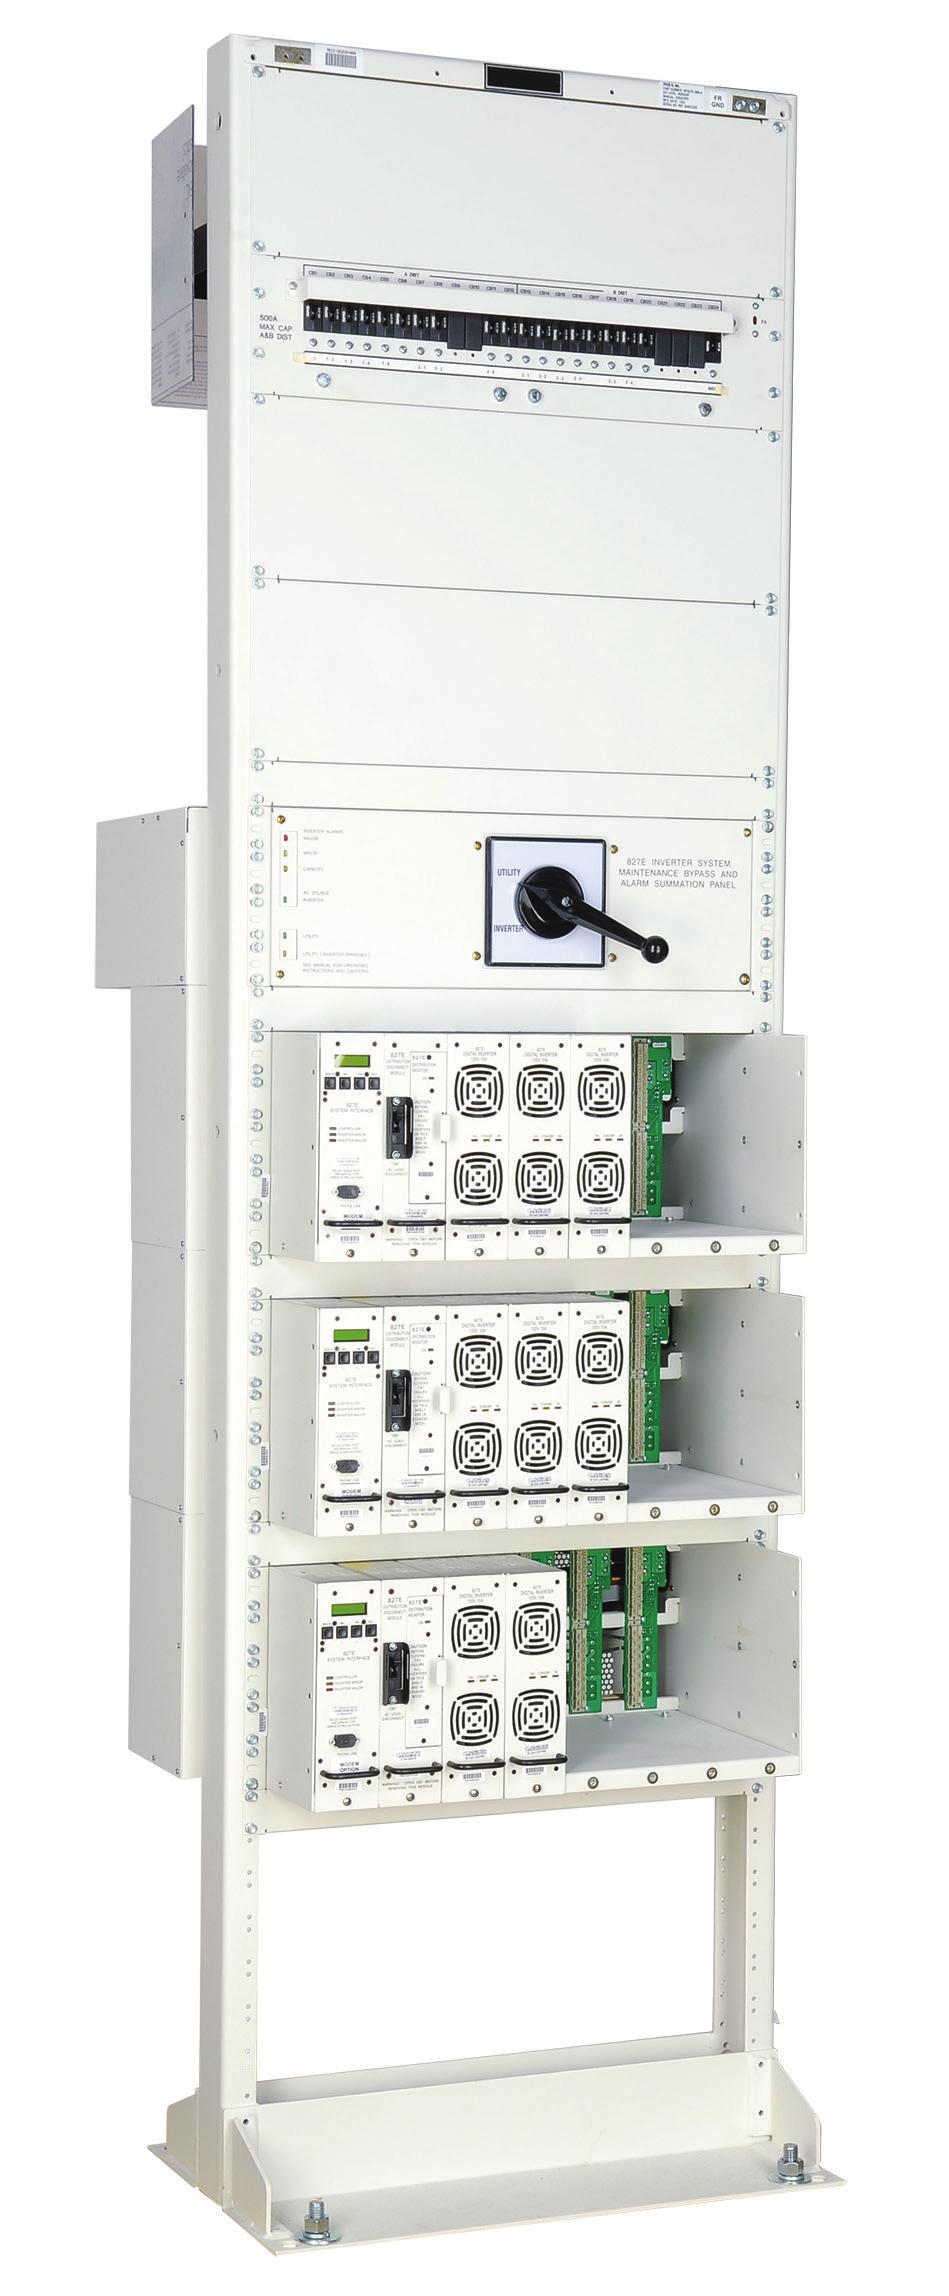 The -48Vdc system can be expanded to a four shelf arrangement for applications requiring as much as 28.8KVA of 120Vac, 230Vac or 240Vac.